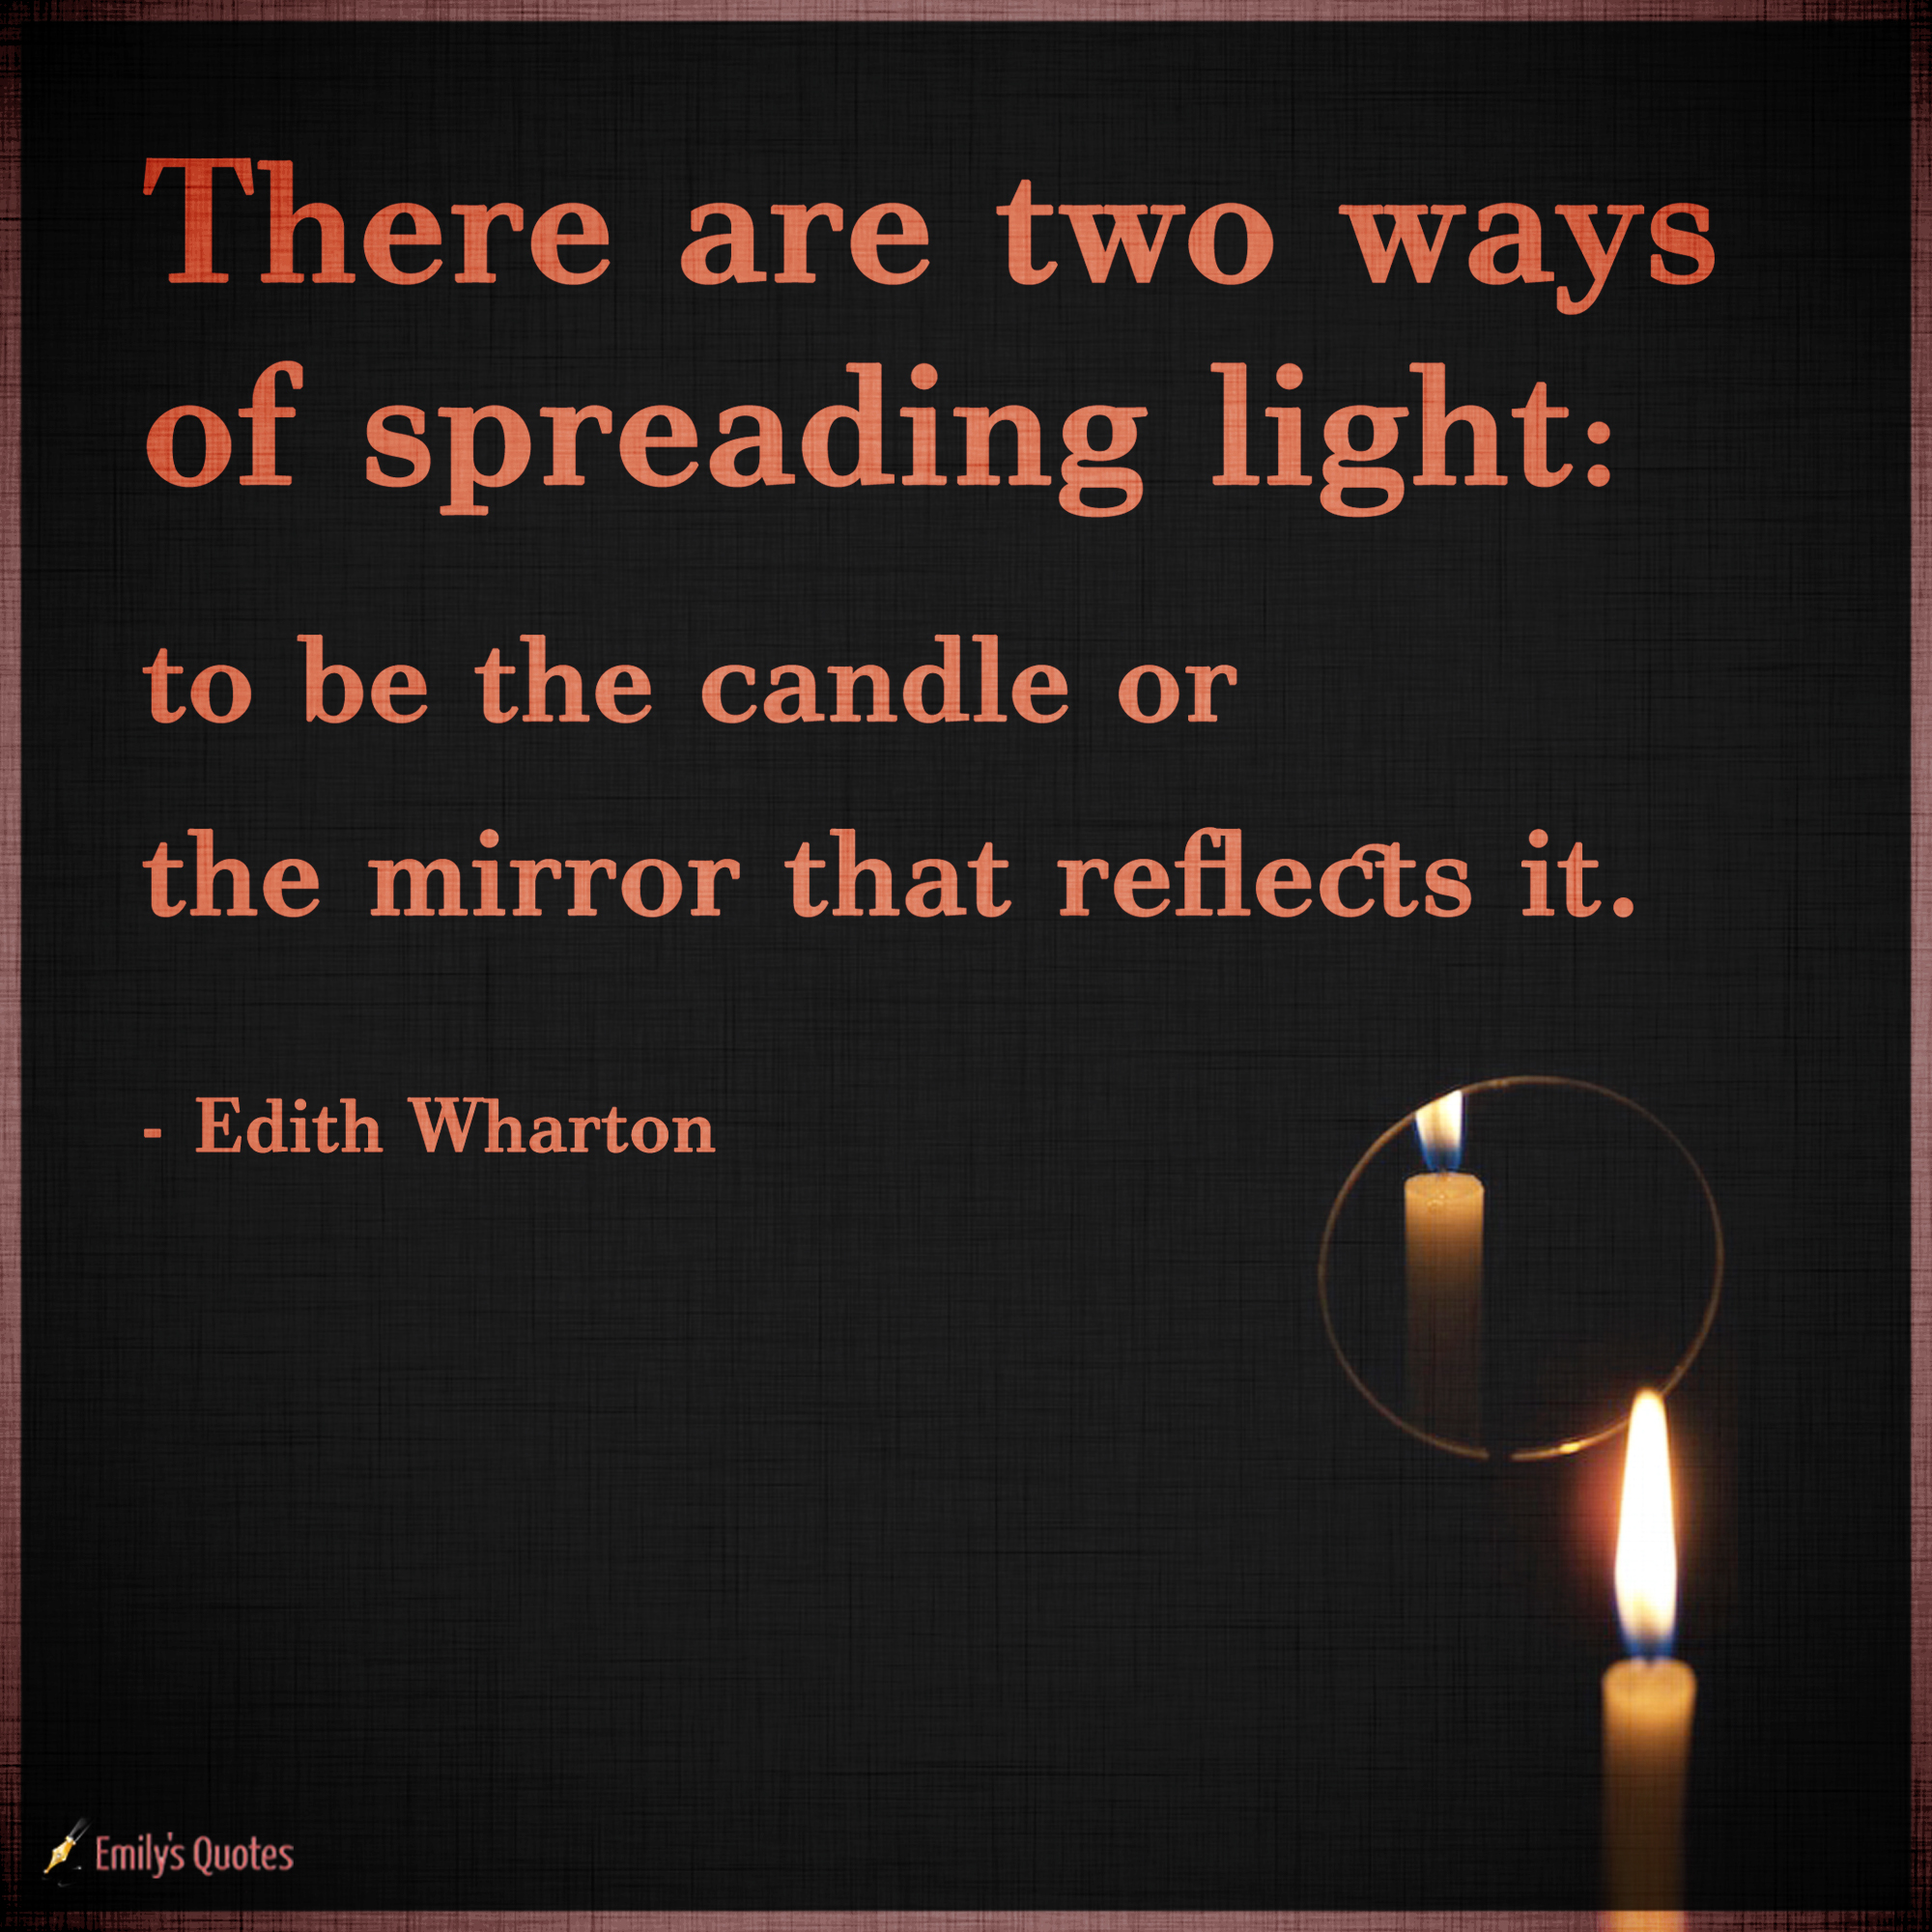 There are two ways of spreading light: to be the candle or the mirror